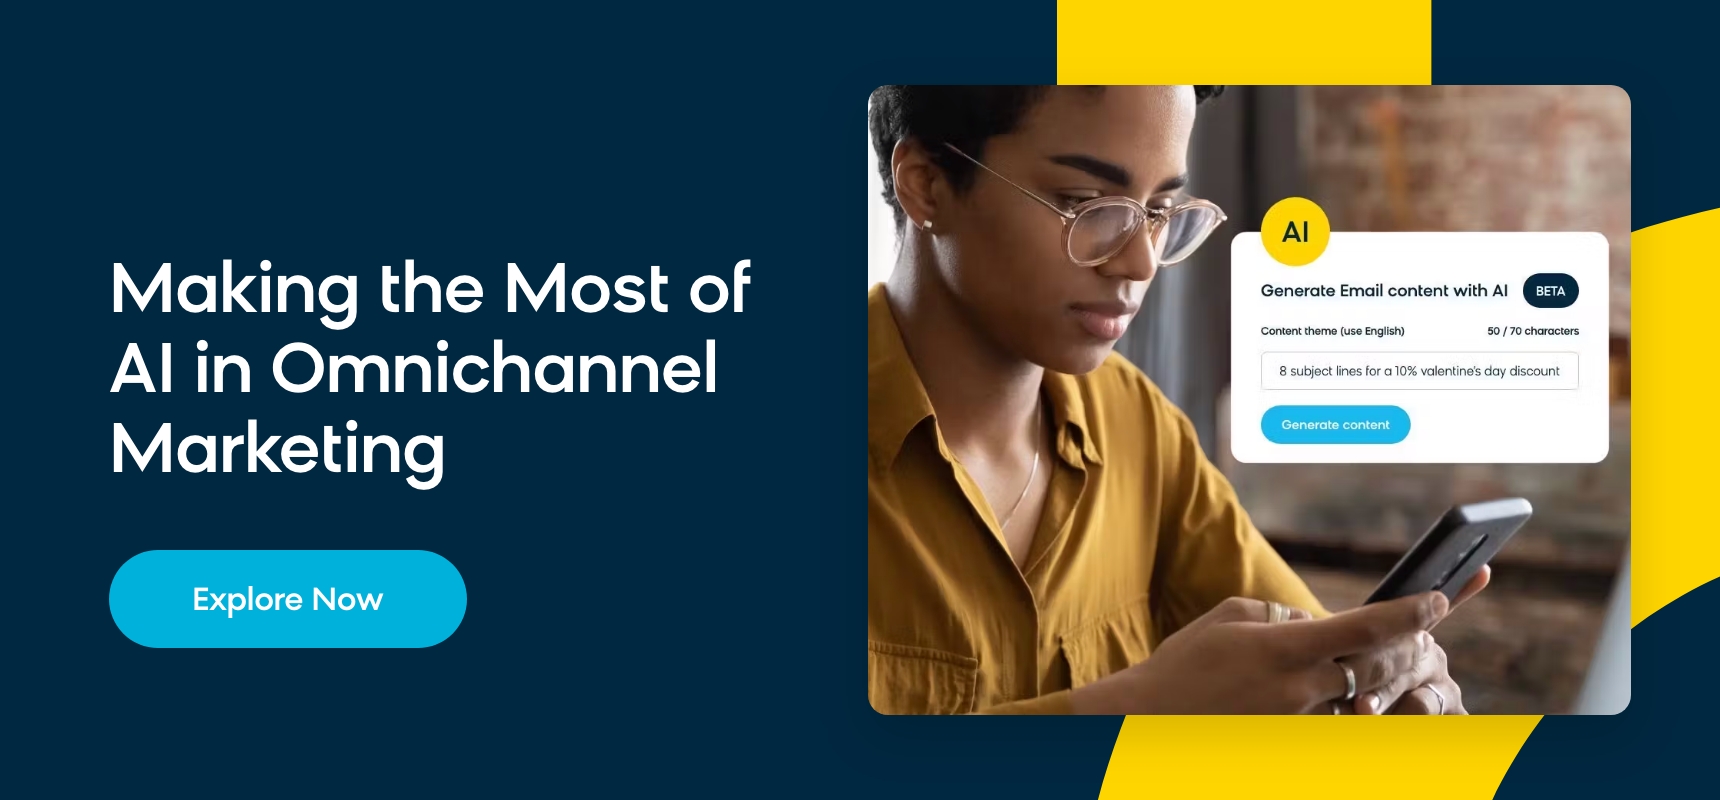 Making the most of AI in omnichannel marketing